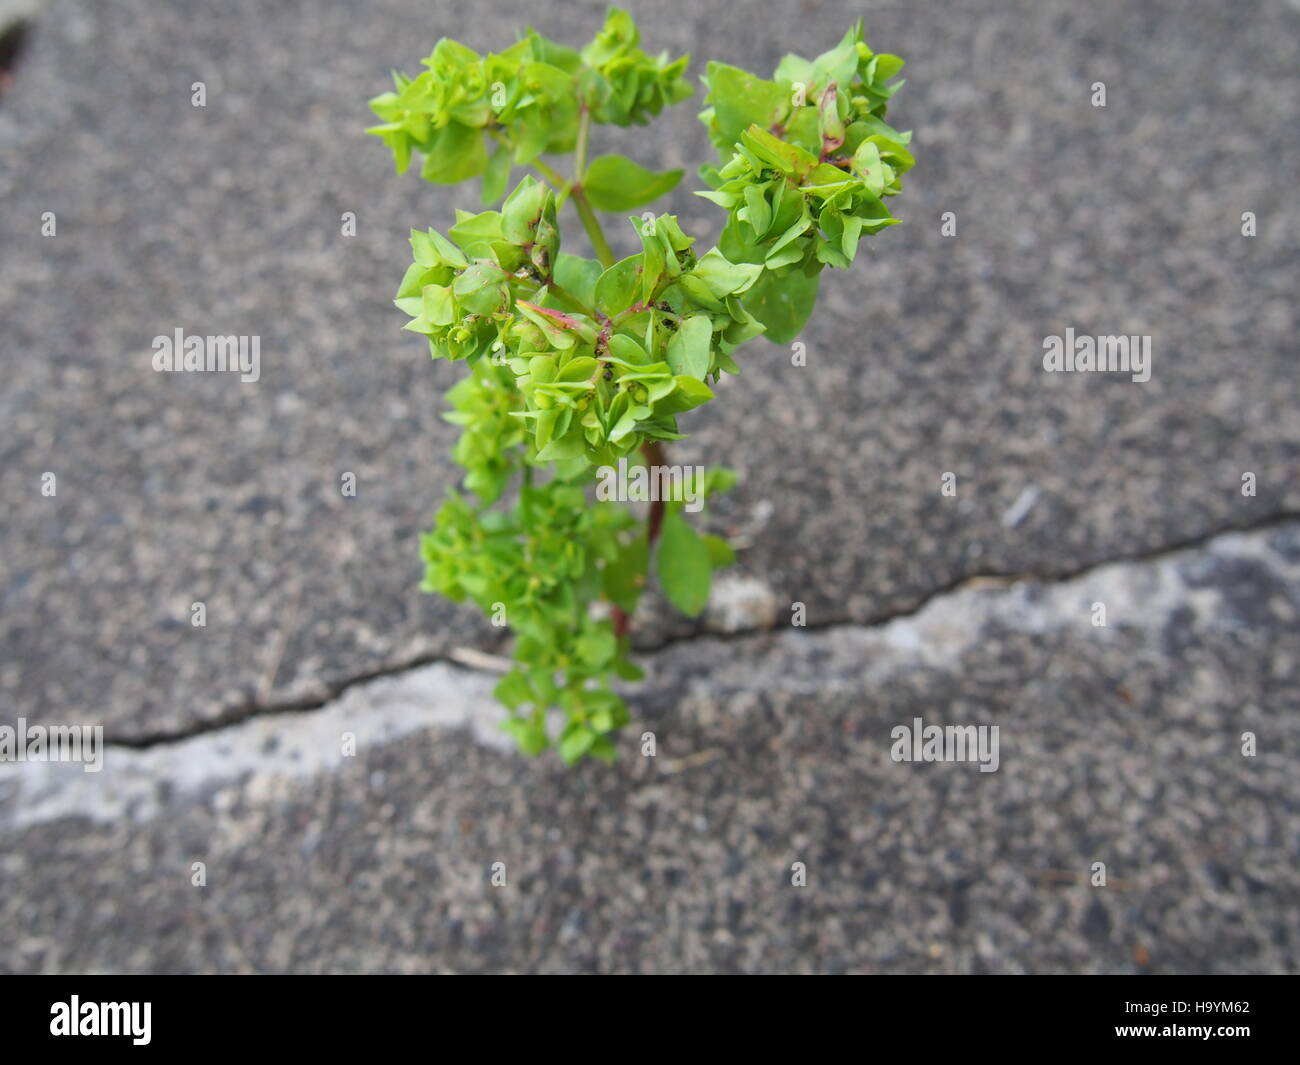 Plant or weed growing through a crack in concrete paving stones, overcoming adversity and flourishing Stock Photo